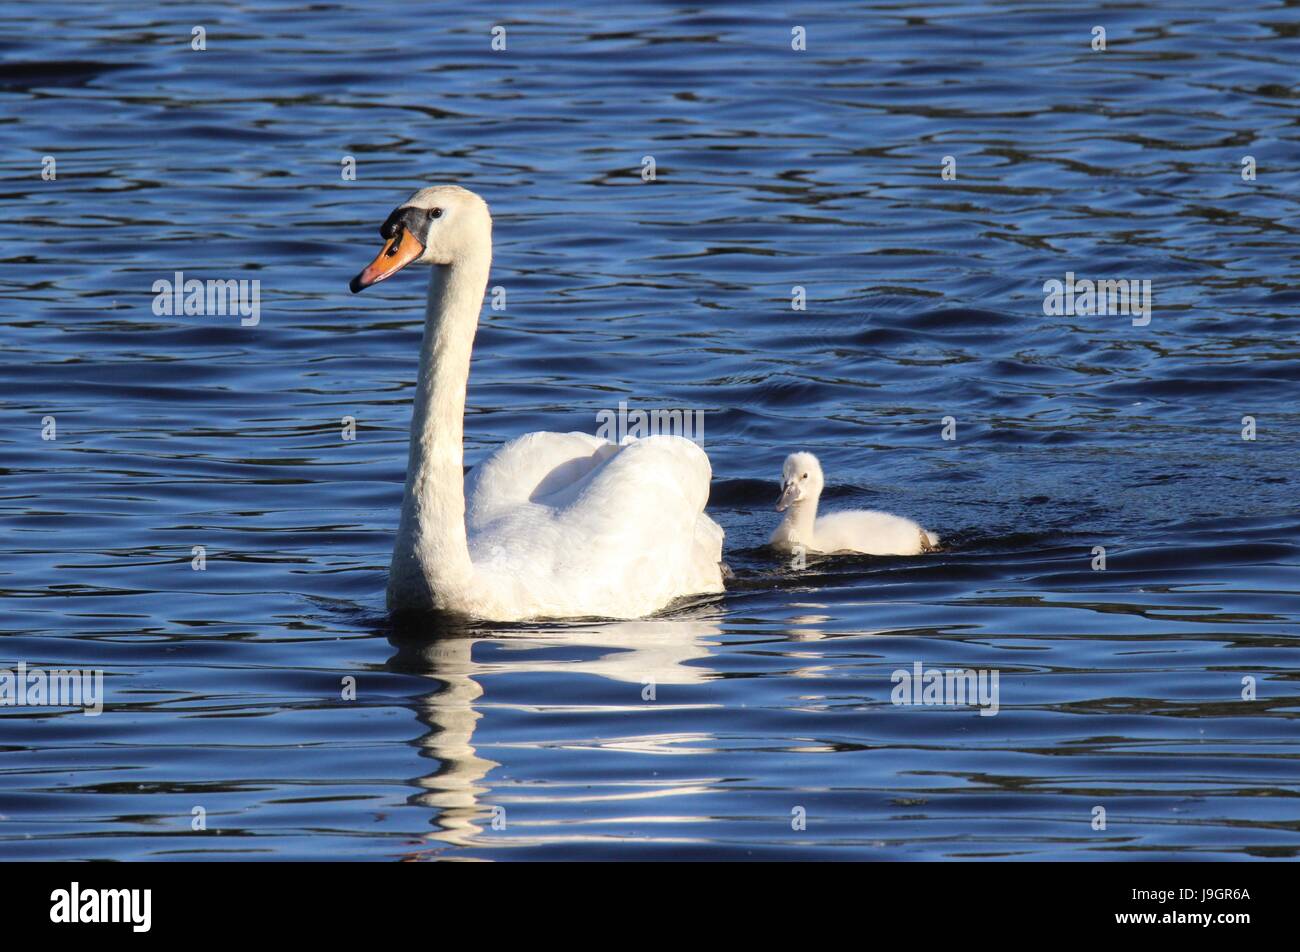 A mute swan Cygnus color swimming with one cygnet Stock Photo